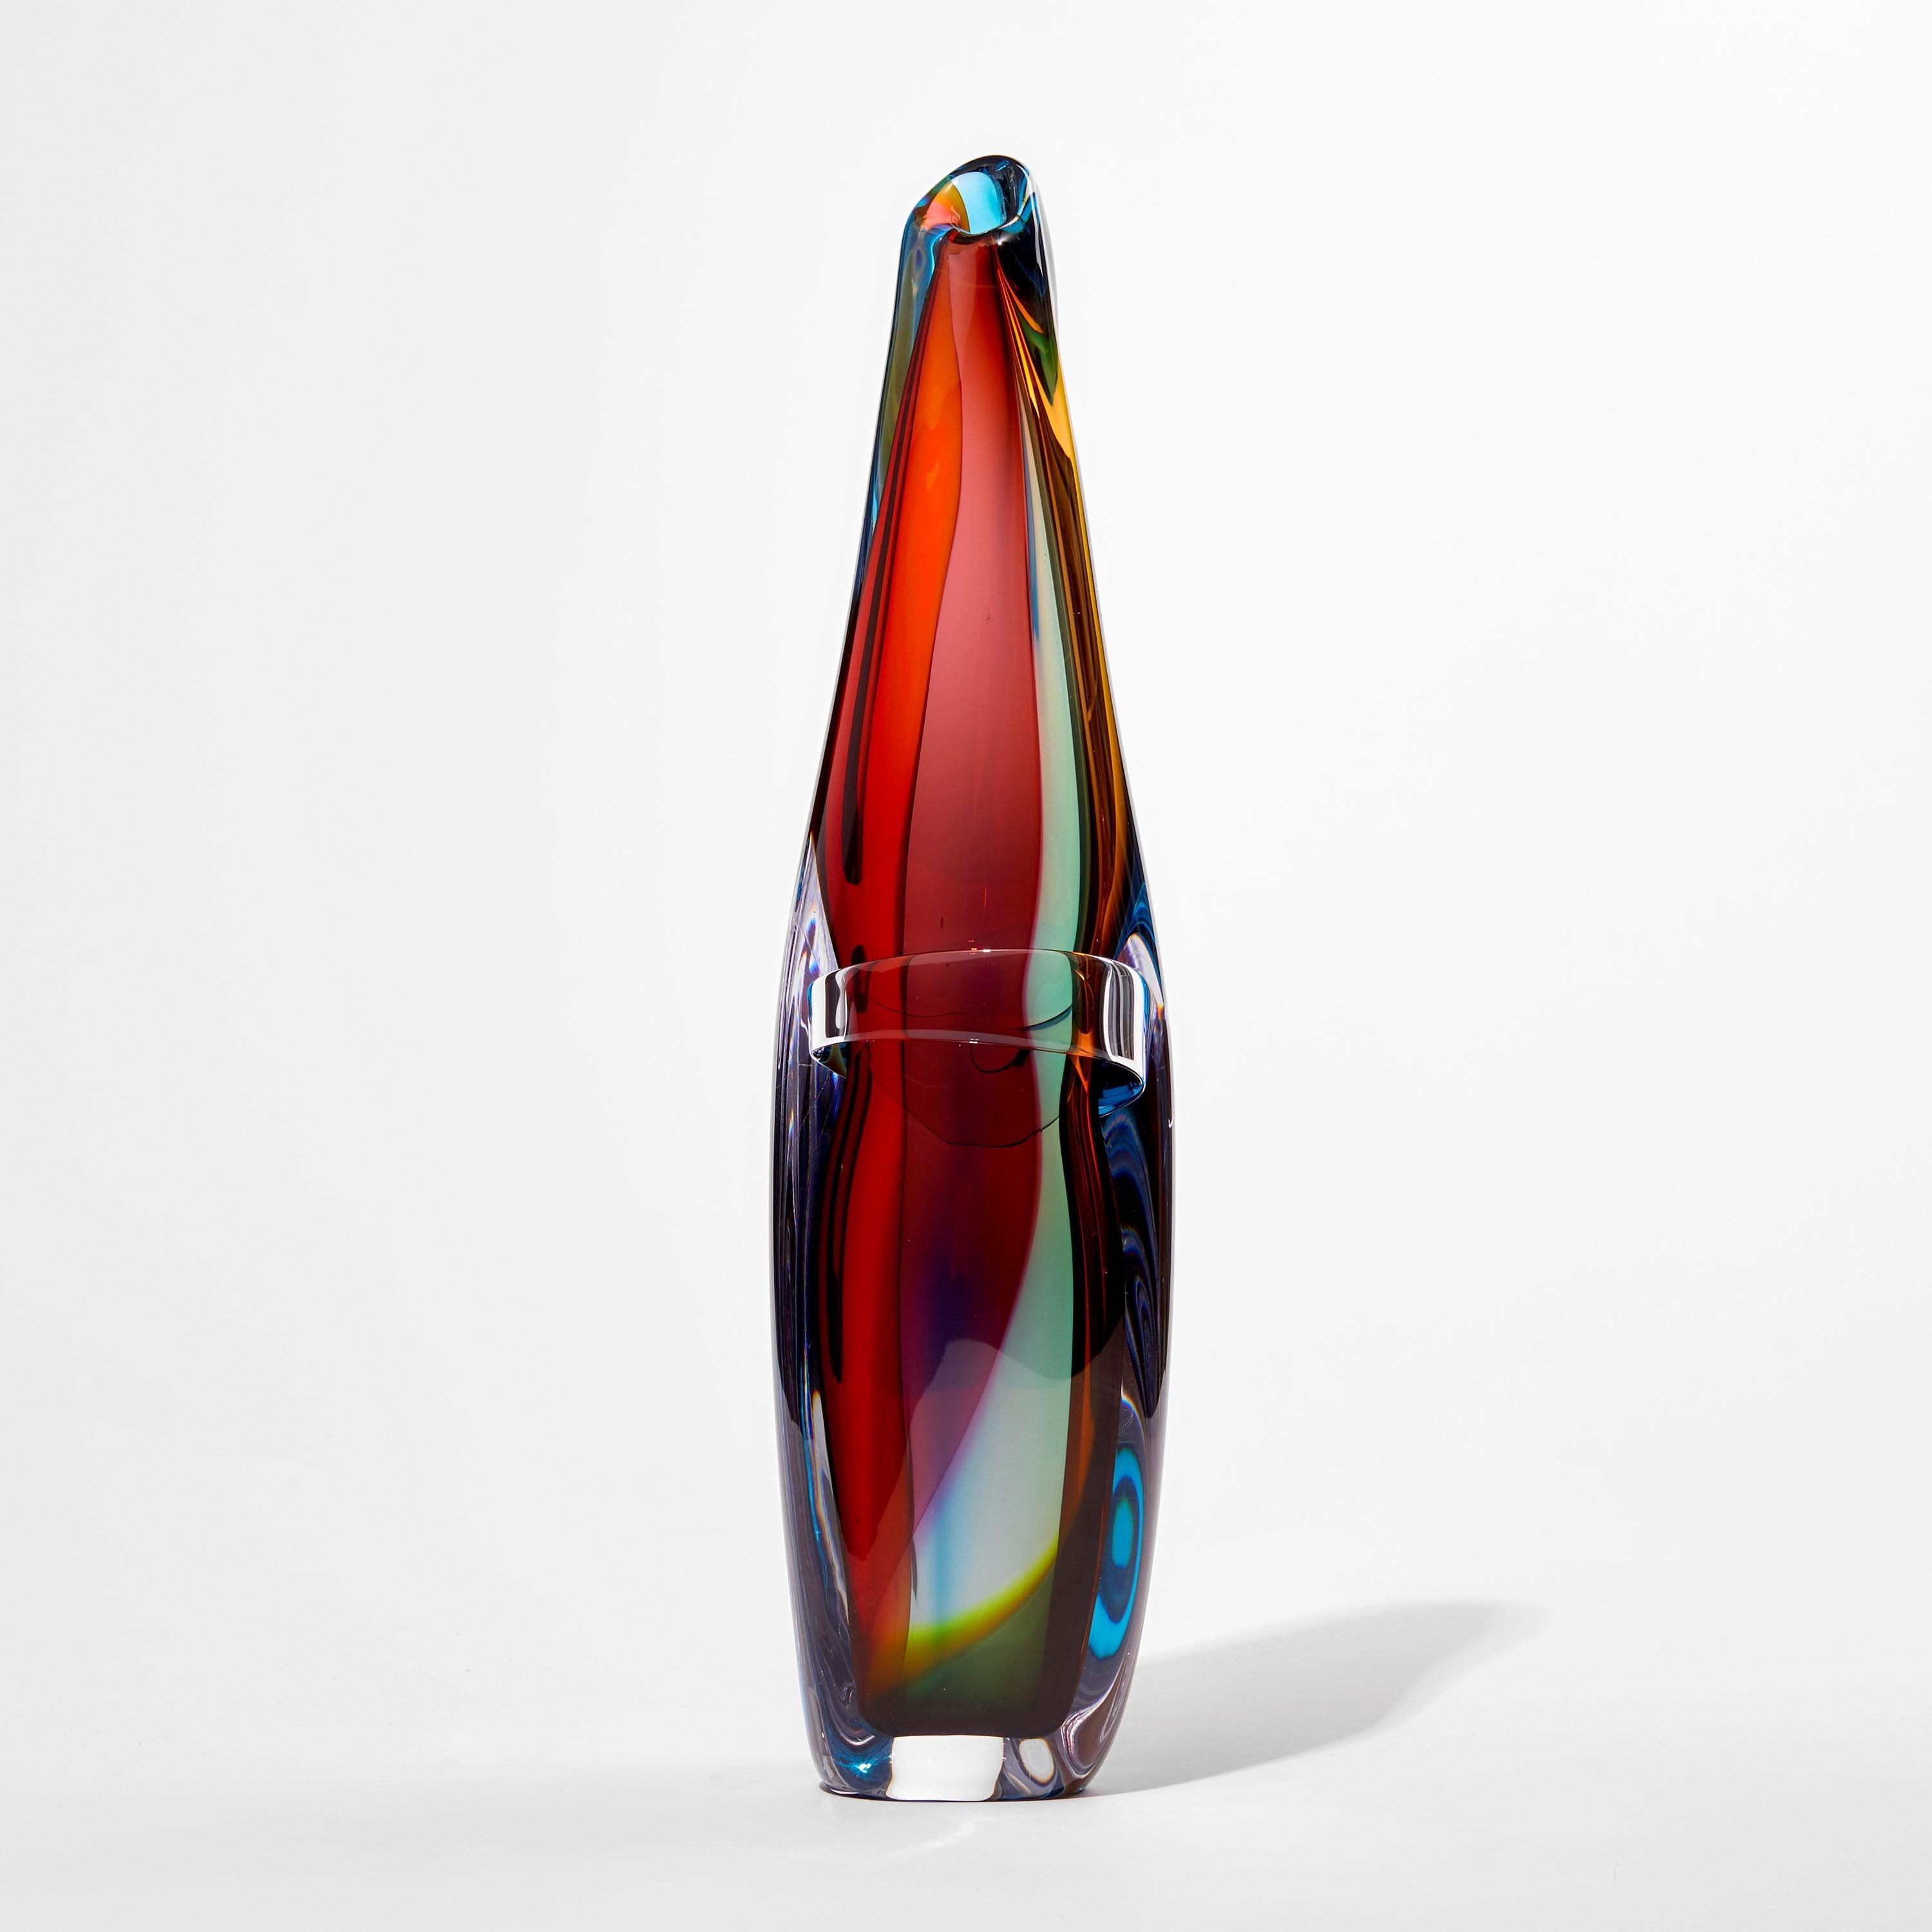 'Tricolarial 50' is a unique hand blown sculptural vase by the British artist Vic Bamforth. Blown in red, purple, blue and green colored glass which are encased in clear glass to create this stunning piece. With soft, twisting lines, the form has